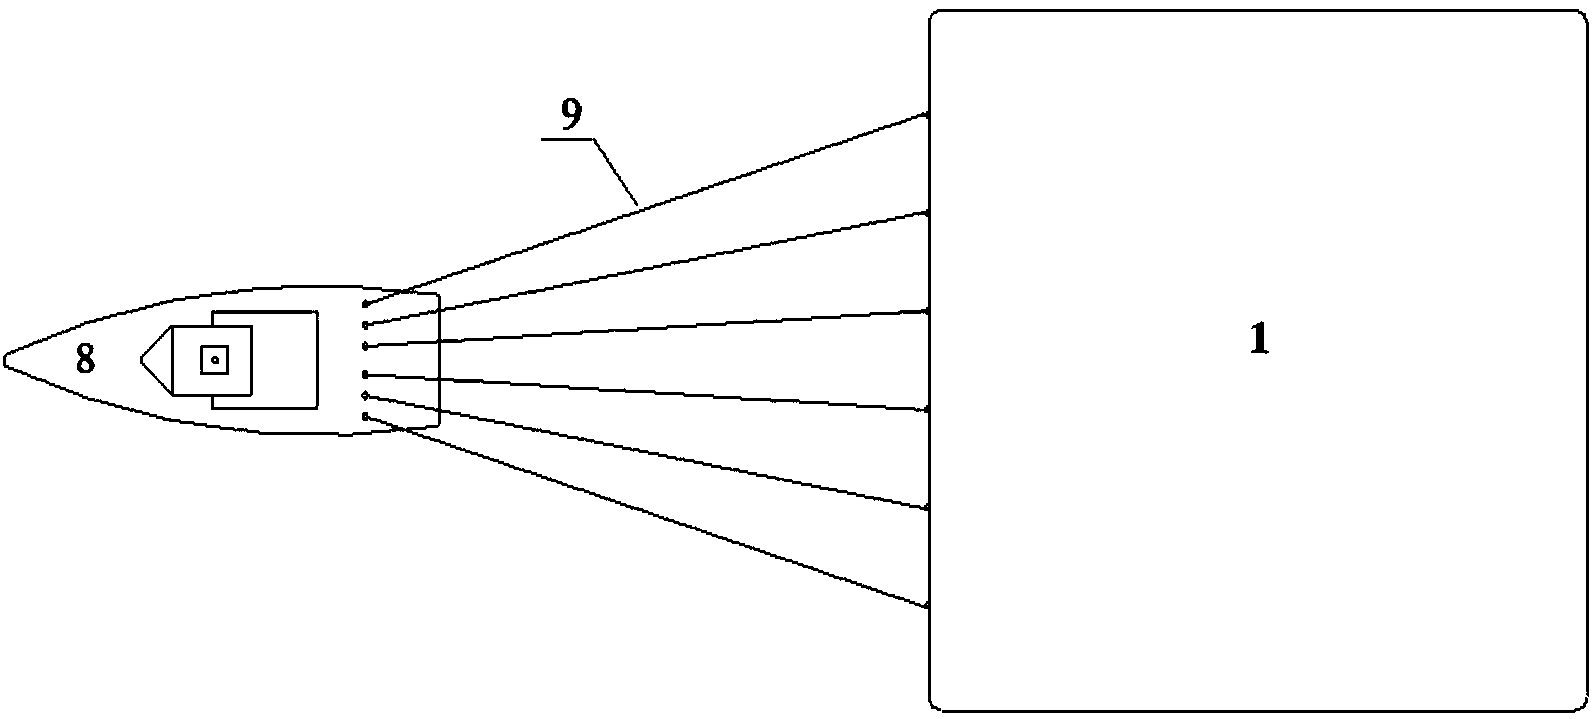 Caisson towing method